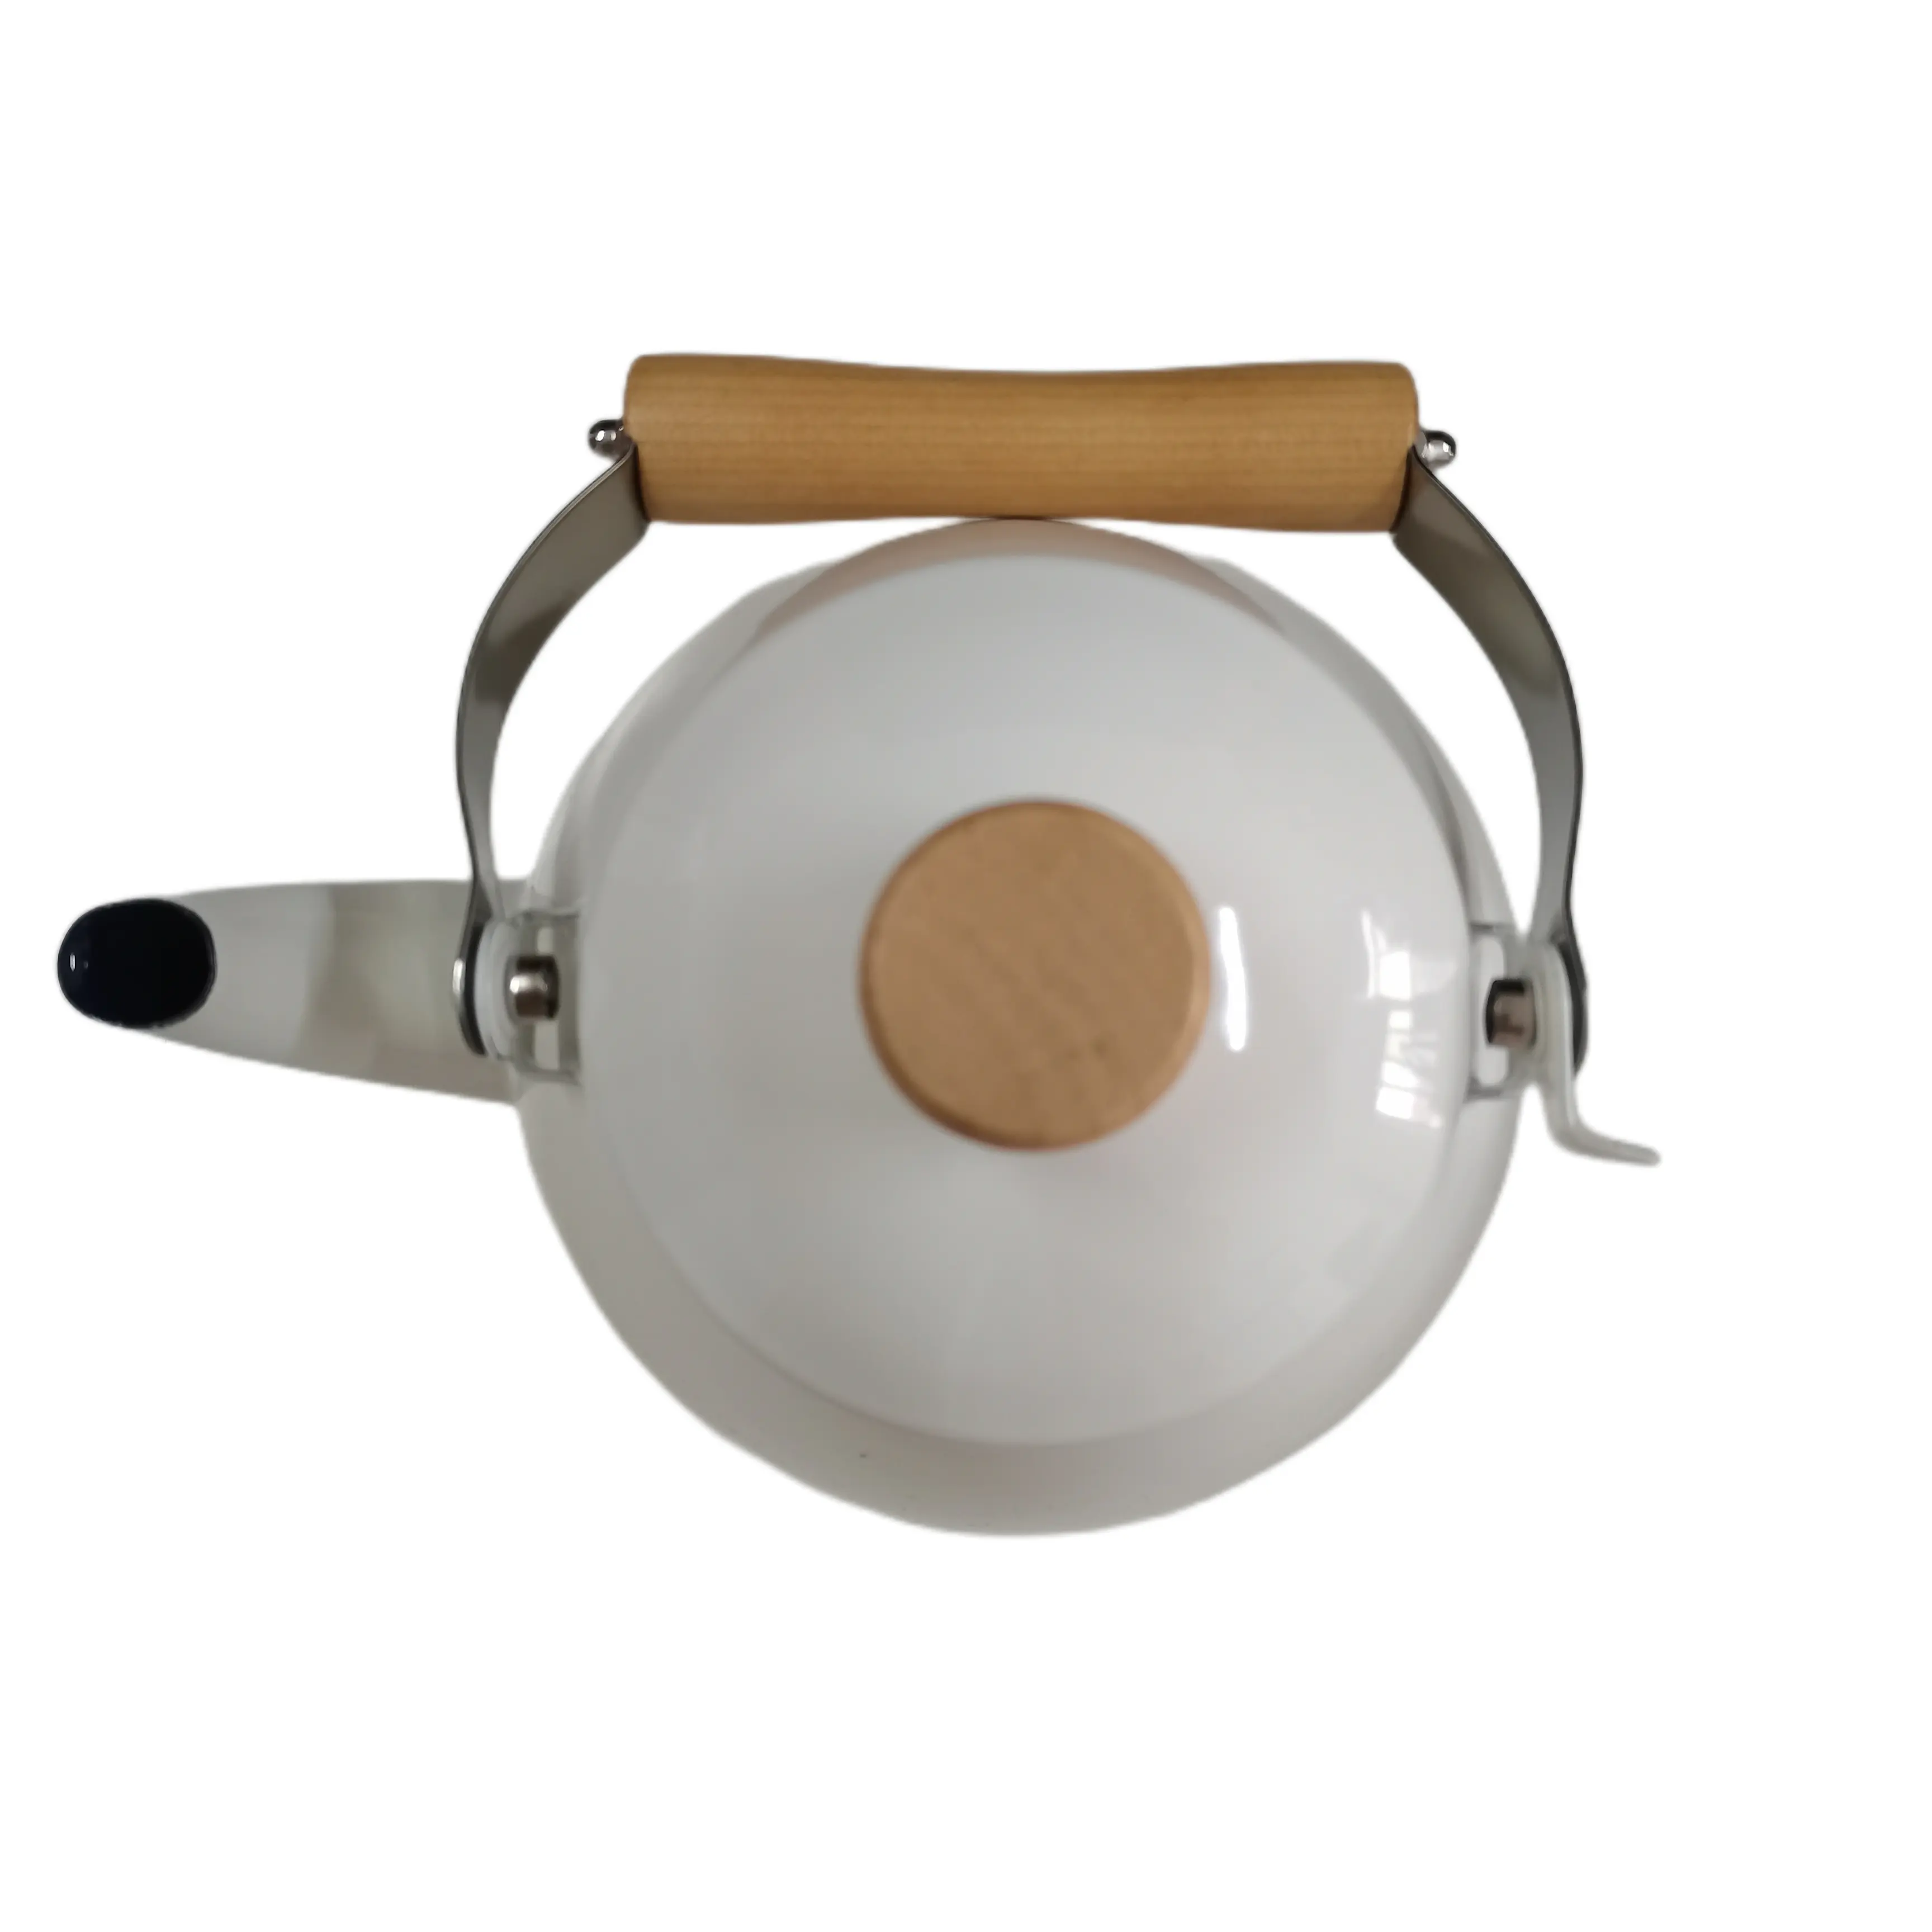 Factory Price 1.5L Enamel kettle for household Body Metal Customized